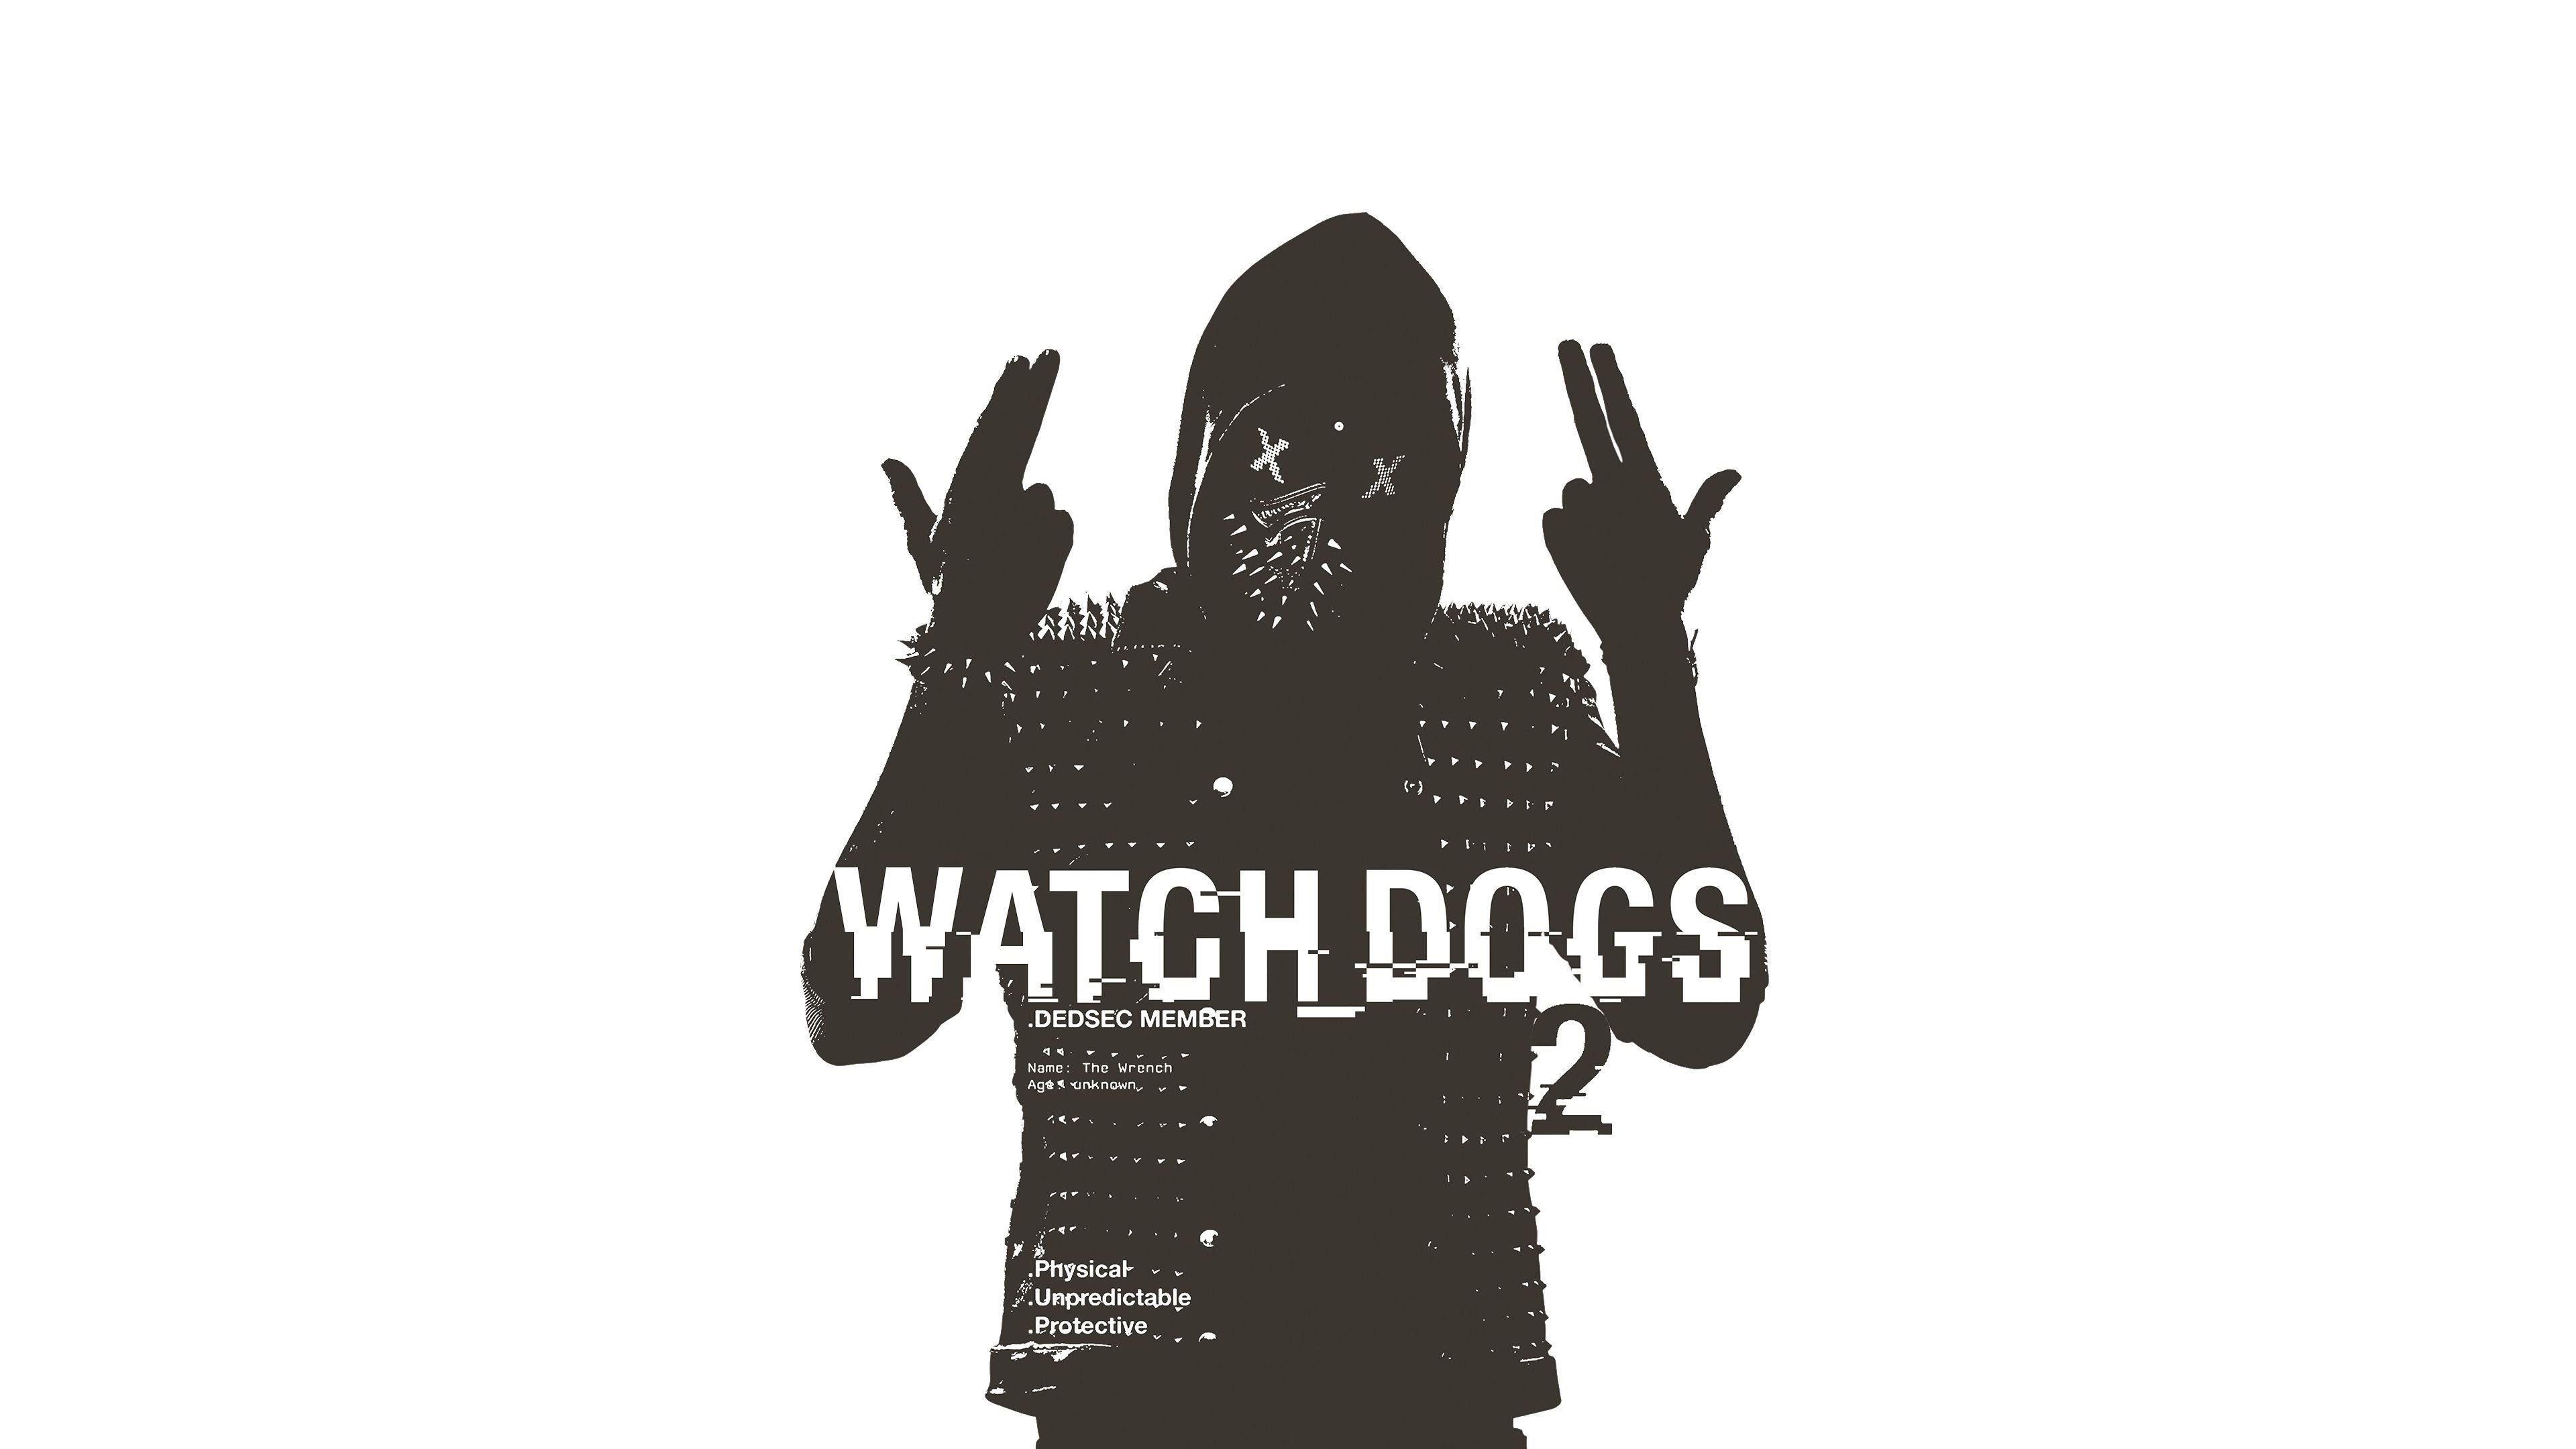 Watch Dogs 2 Wrench Poster, HD Games, 4k Wallpaper, Image